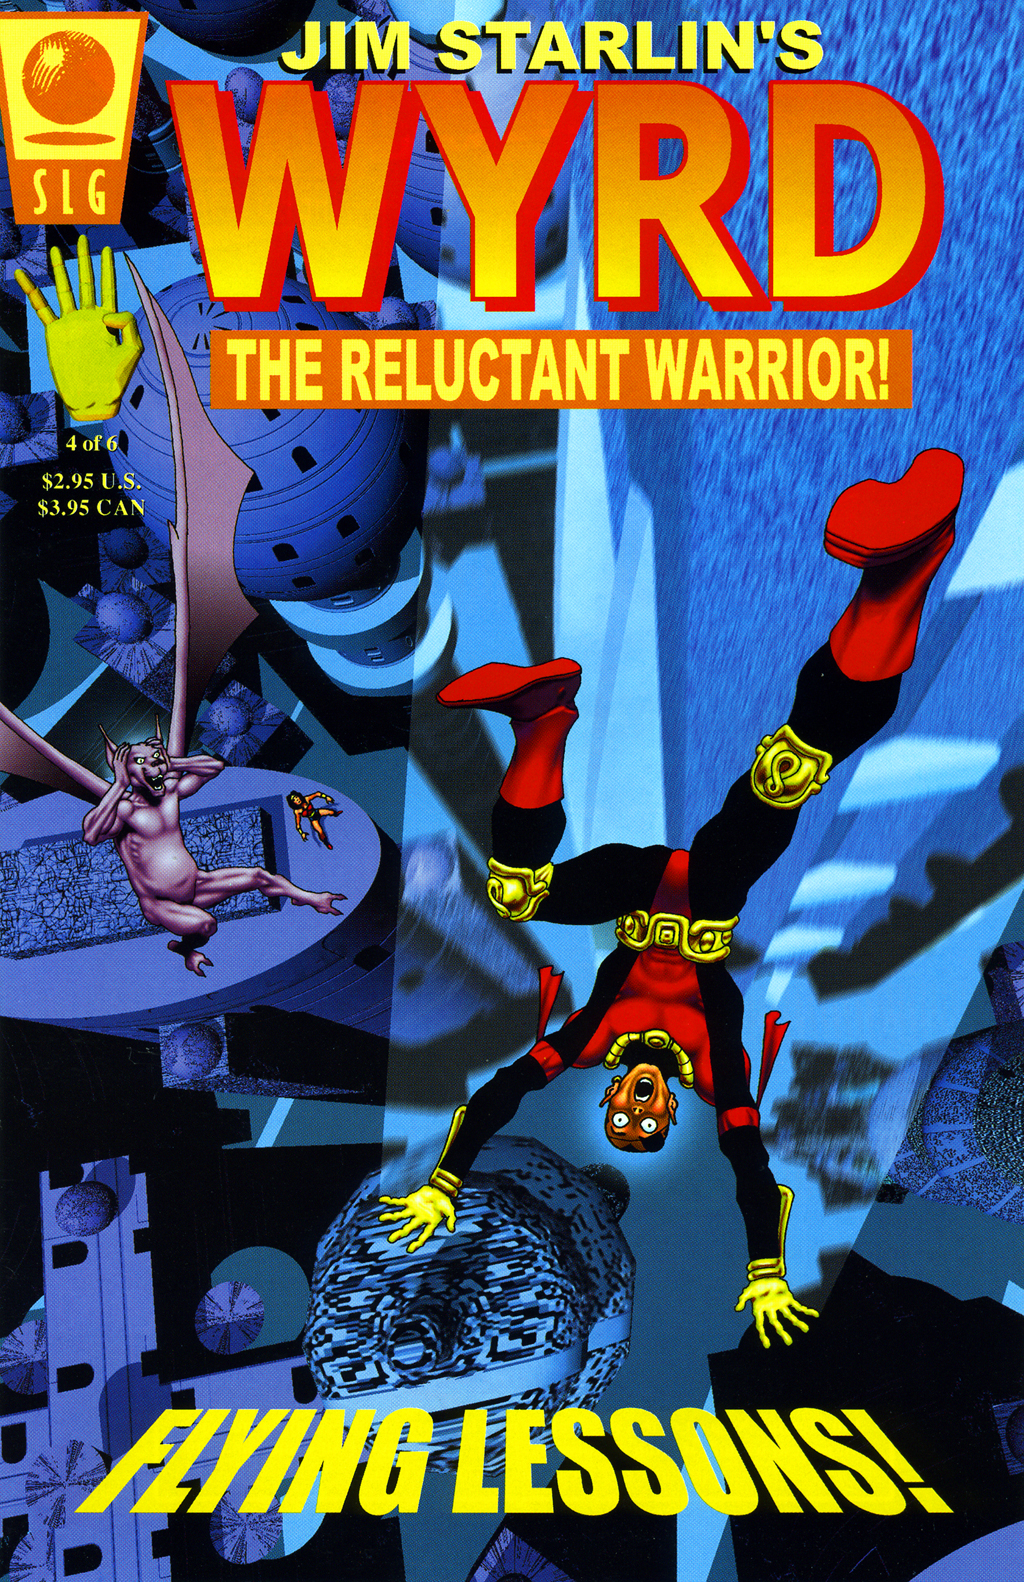 Read online Wyrd the Reluctant Warrior comic -  Issue #4 - 1